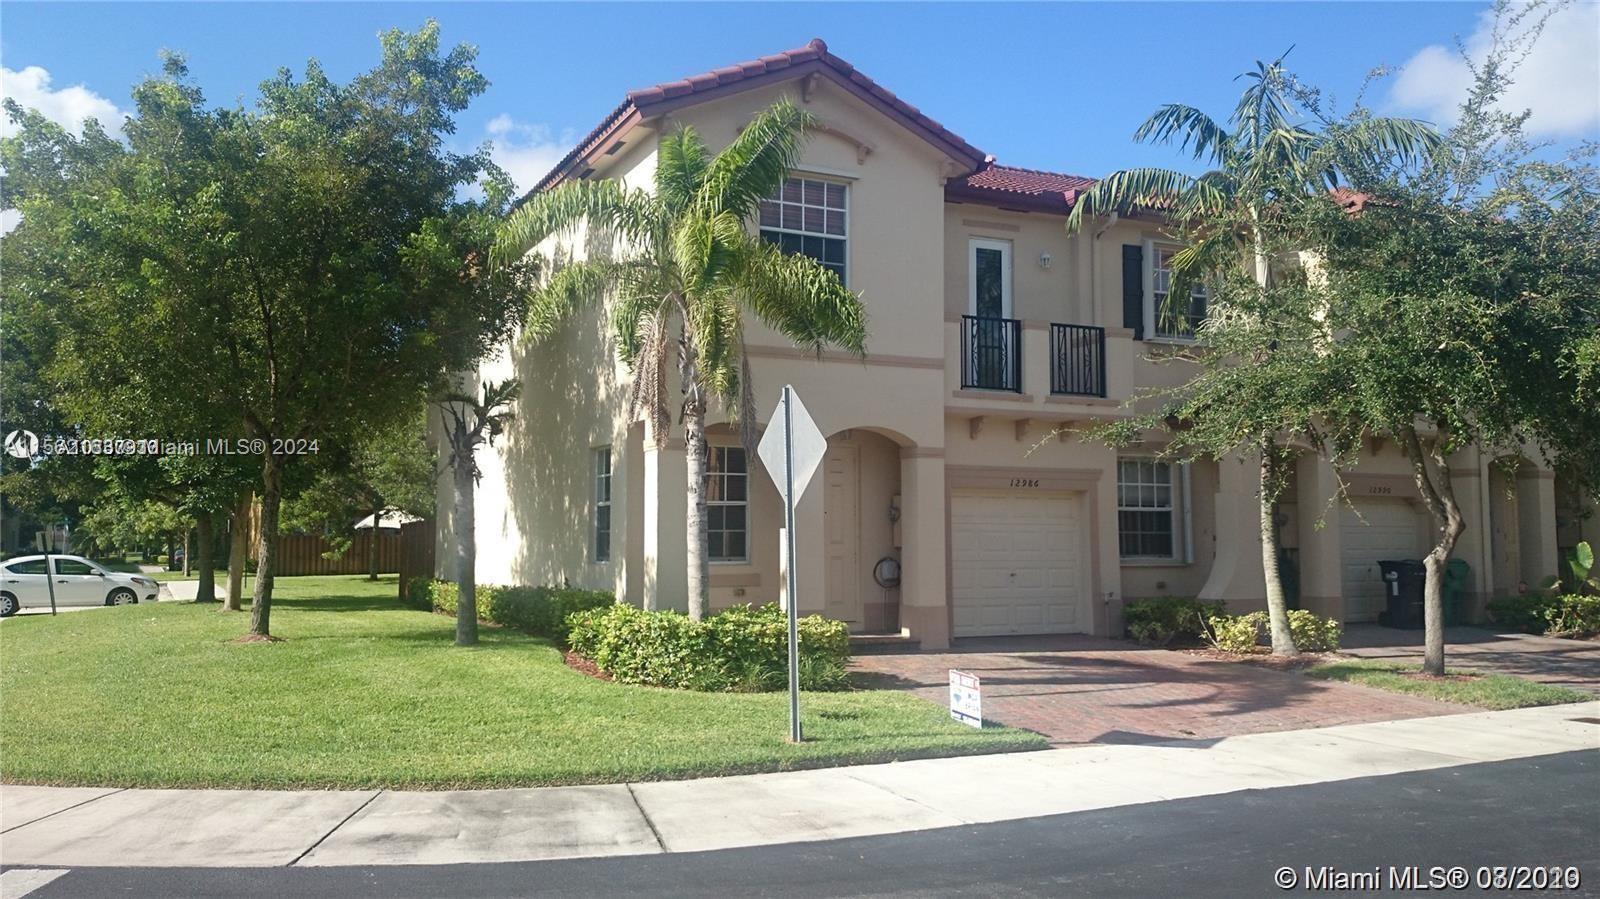 12986 SW 132nd Ter, Miami, Florida 33186, 3 Bedrooms Bedrooms, ,2 BathroomsBathrooms,Residentiallease,For Rent,12986 SW 132nd Ter,A11562163